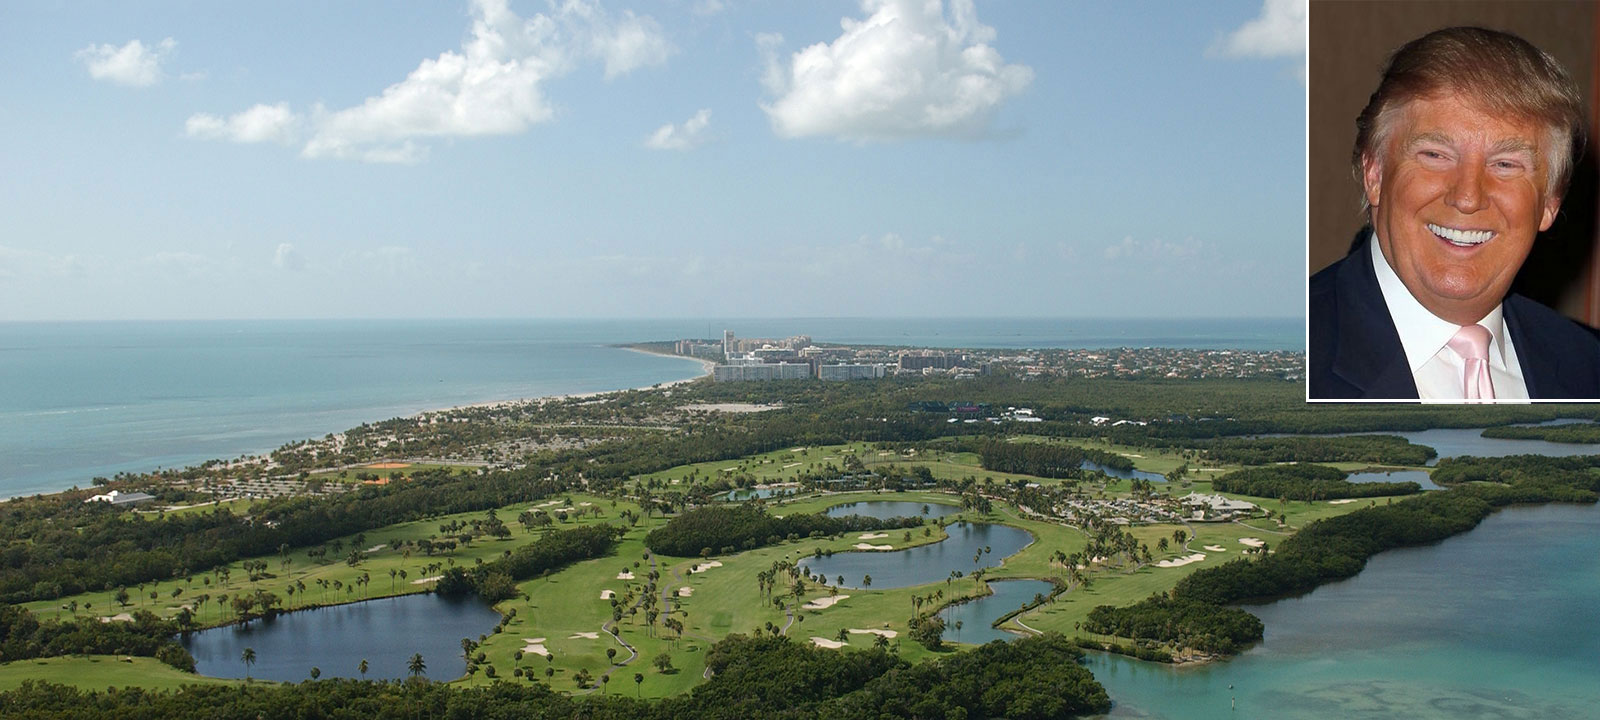 An aerial view of the Crandon golf course and Donald Trump